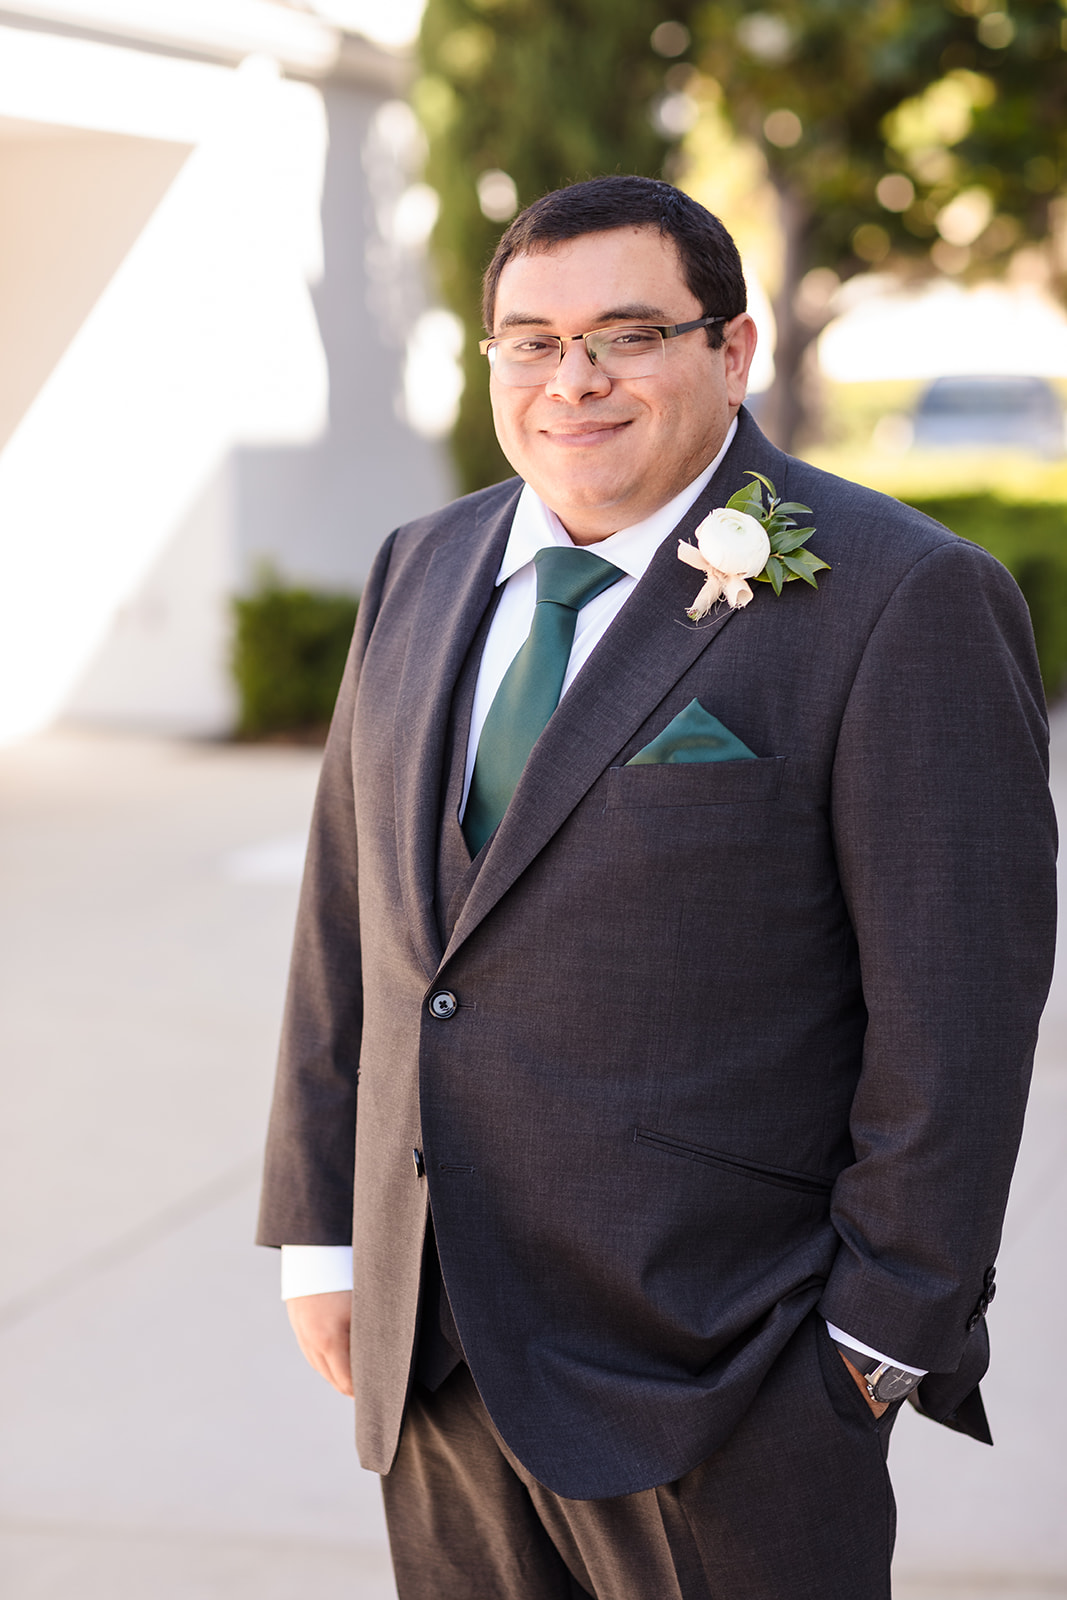 Groom's grey suit with green tie and white floral boutinniere